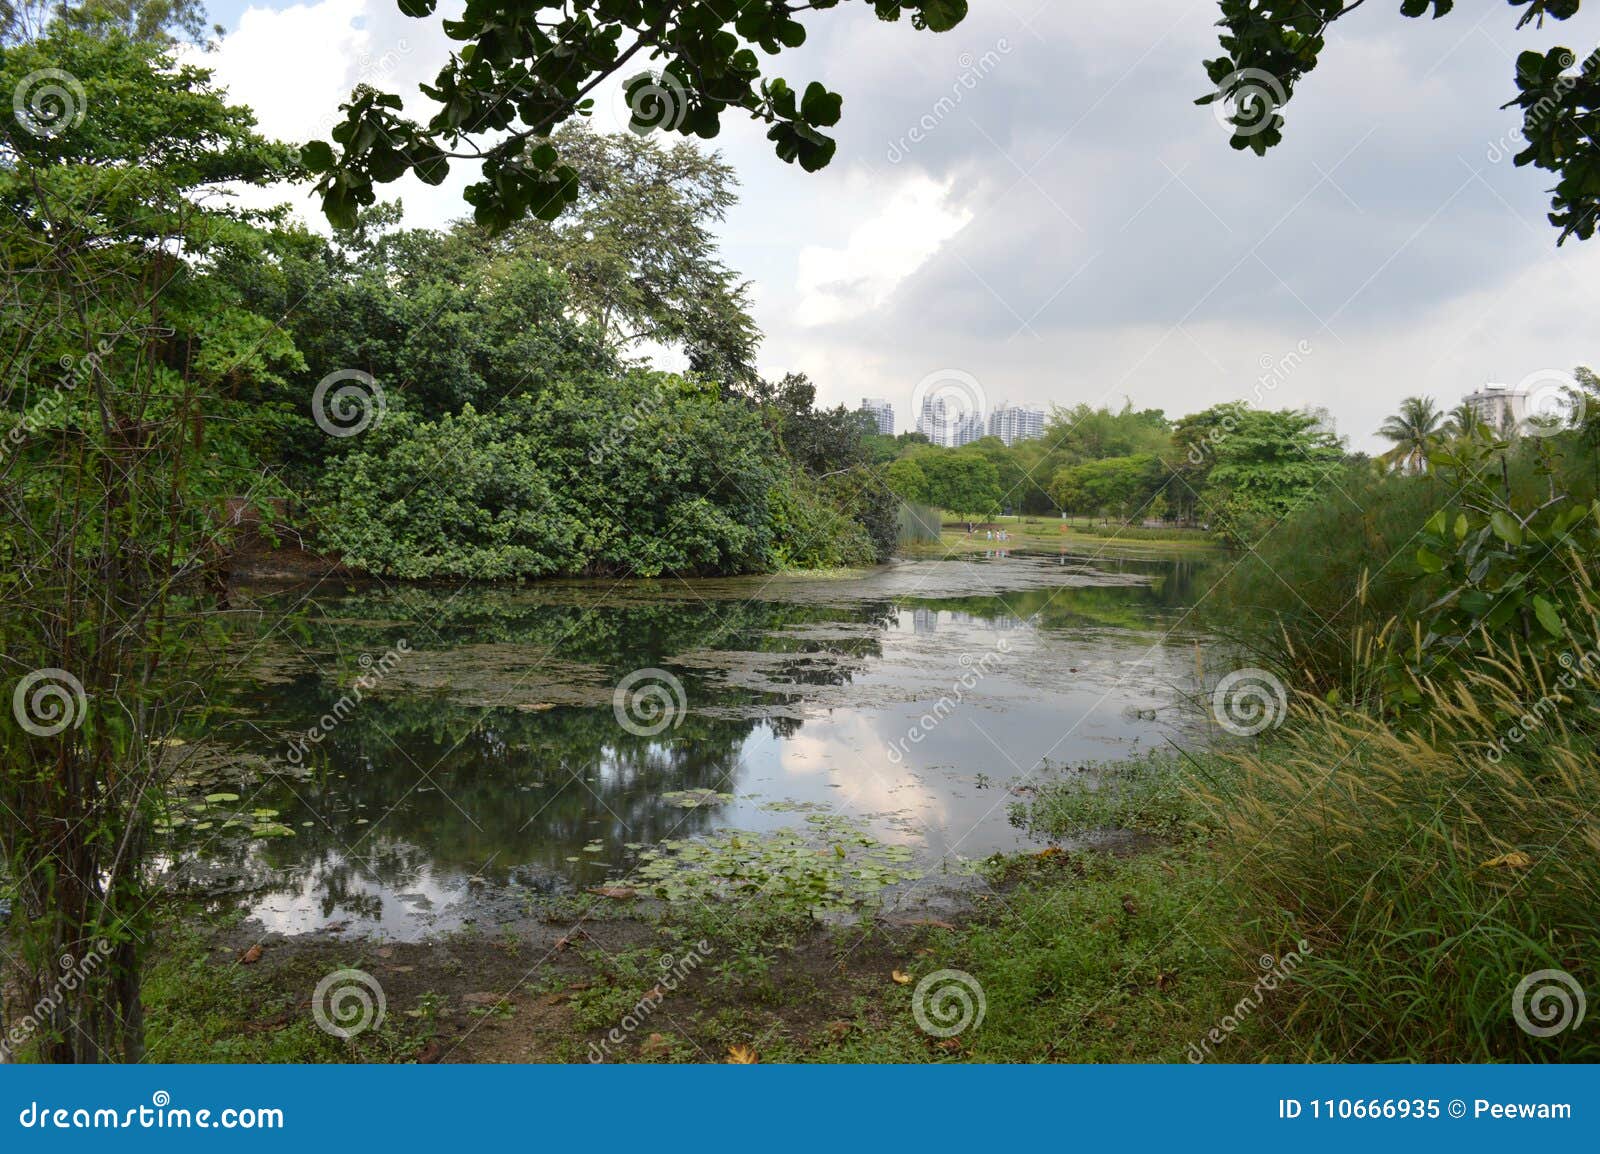 View Over a Pond at Singapore Botanical Gardens Stock Image - Image of ...